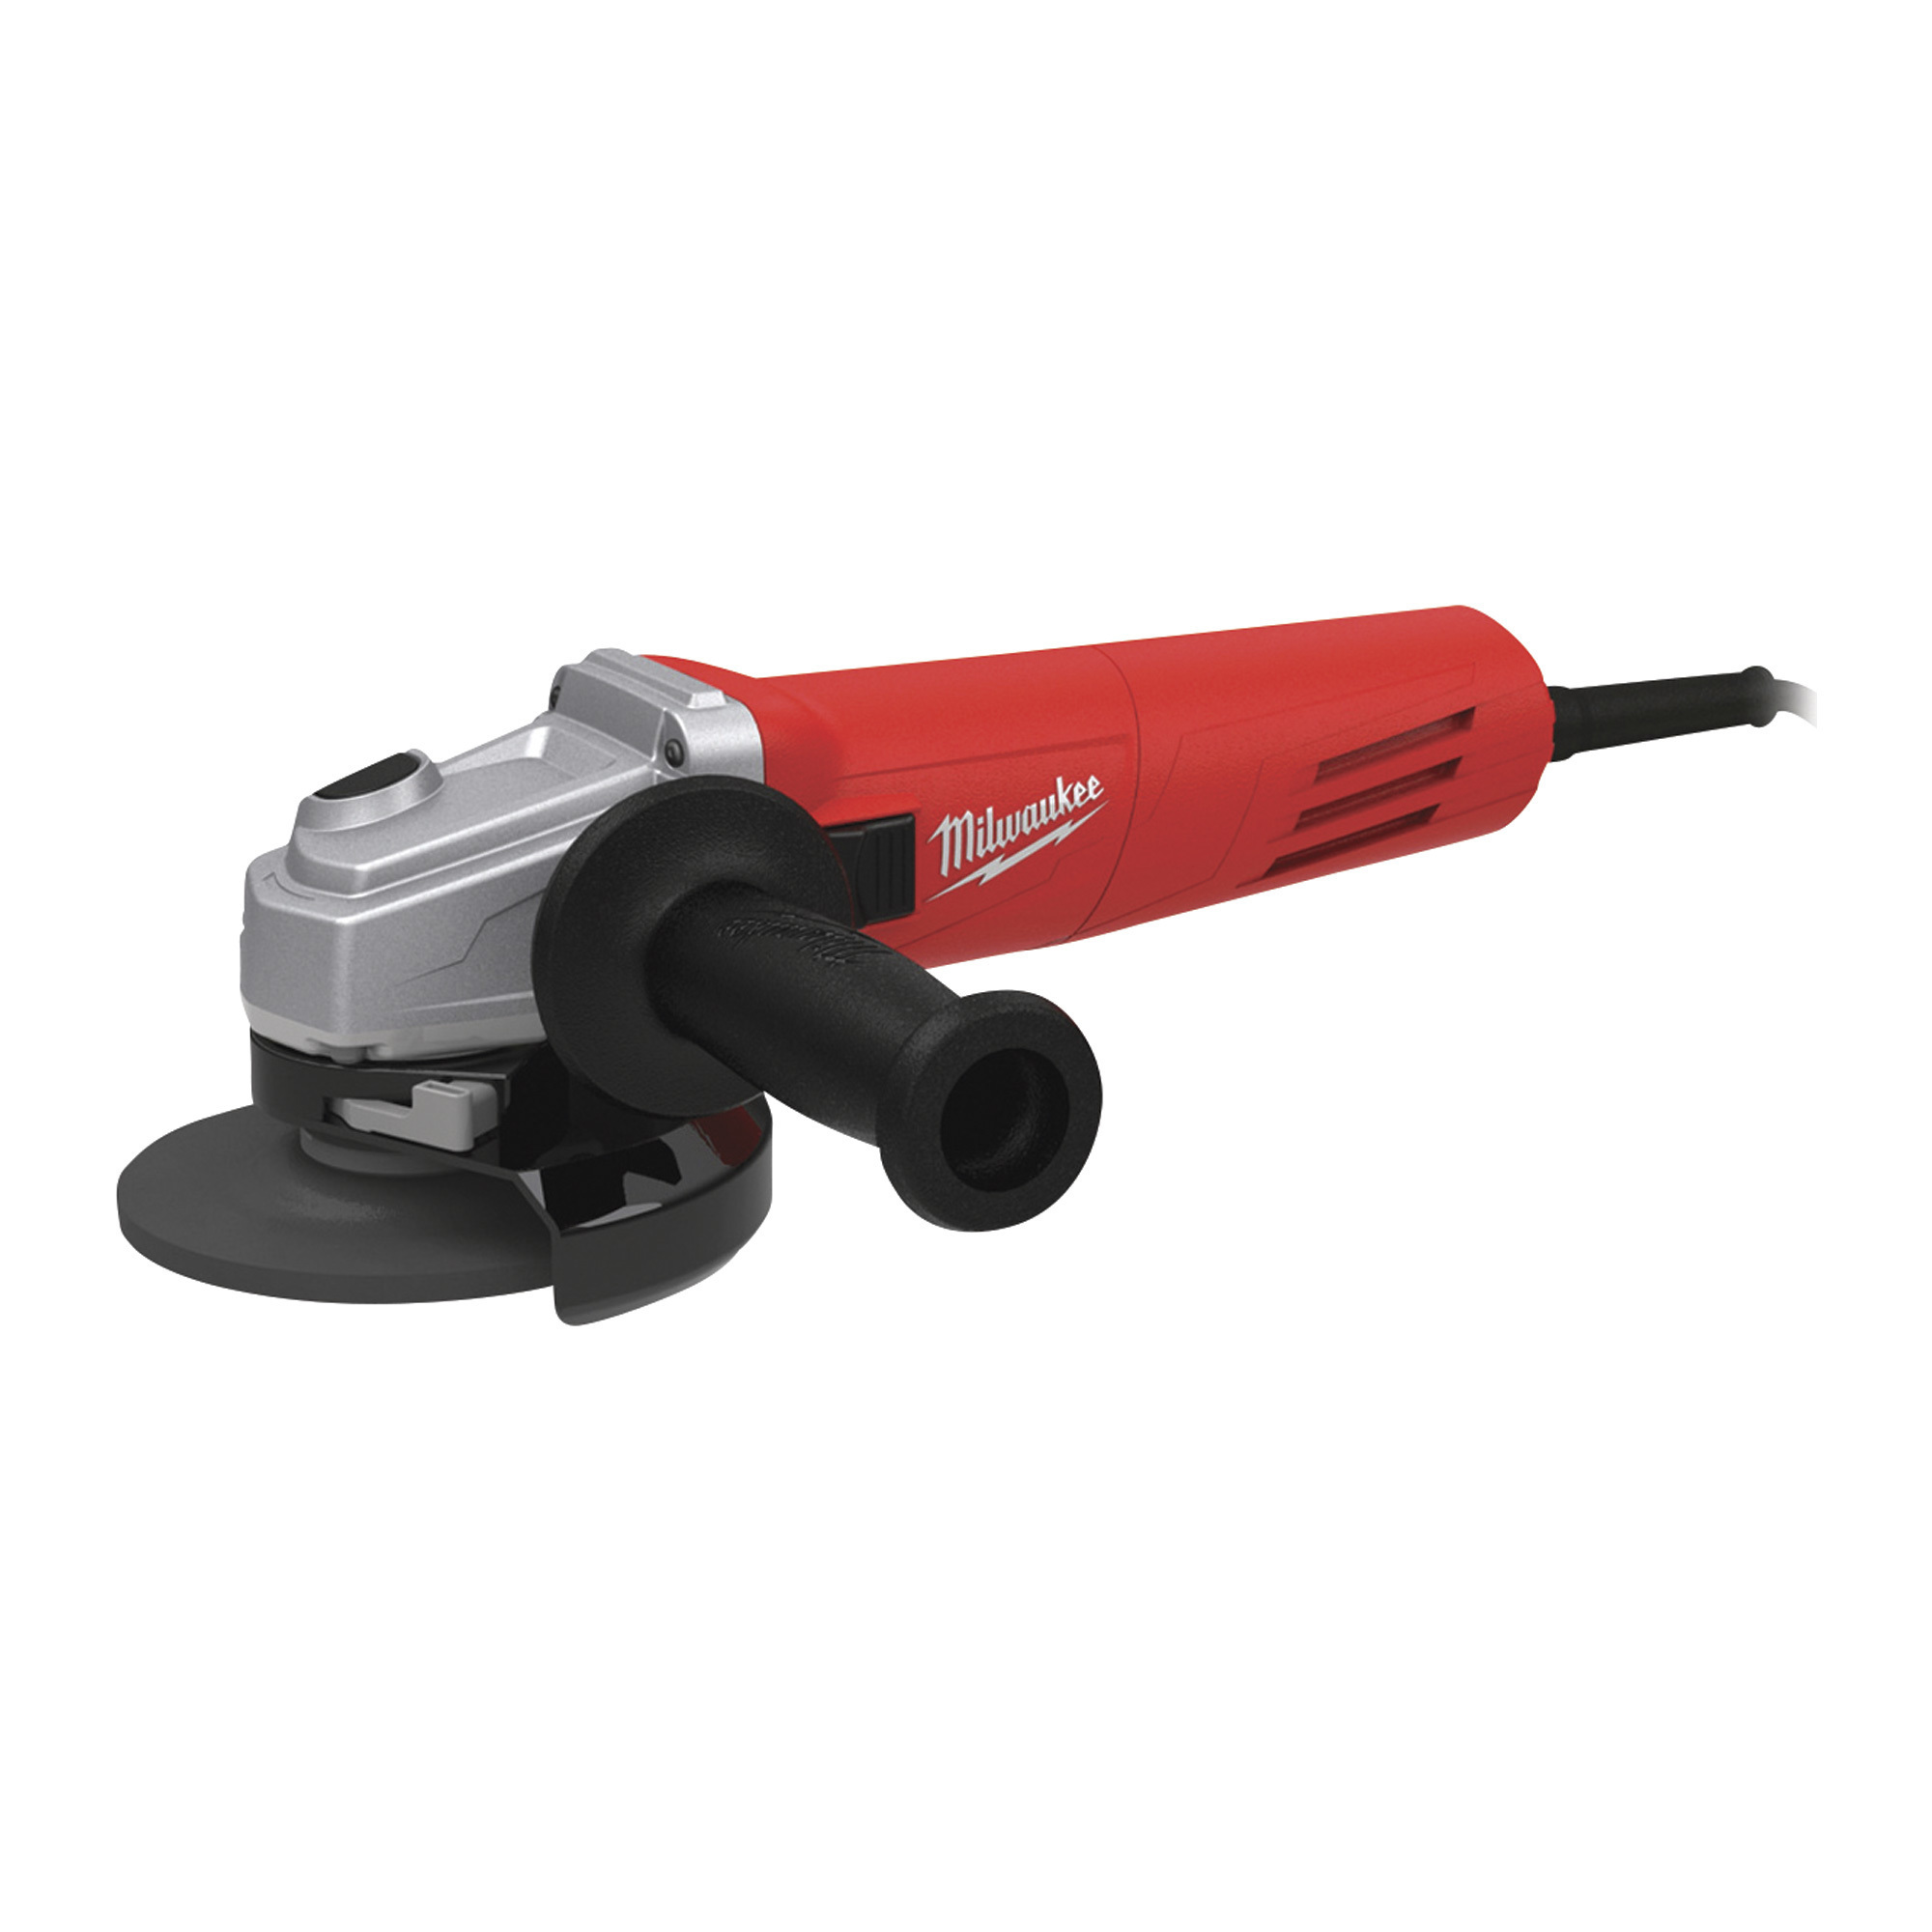 Milwaukee 4 1/2Inch Grinder, 11 Amp, 11,000 RPM, Paddle Grip, Slide Switch, Clutch, Model 6146-33